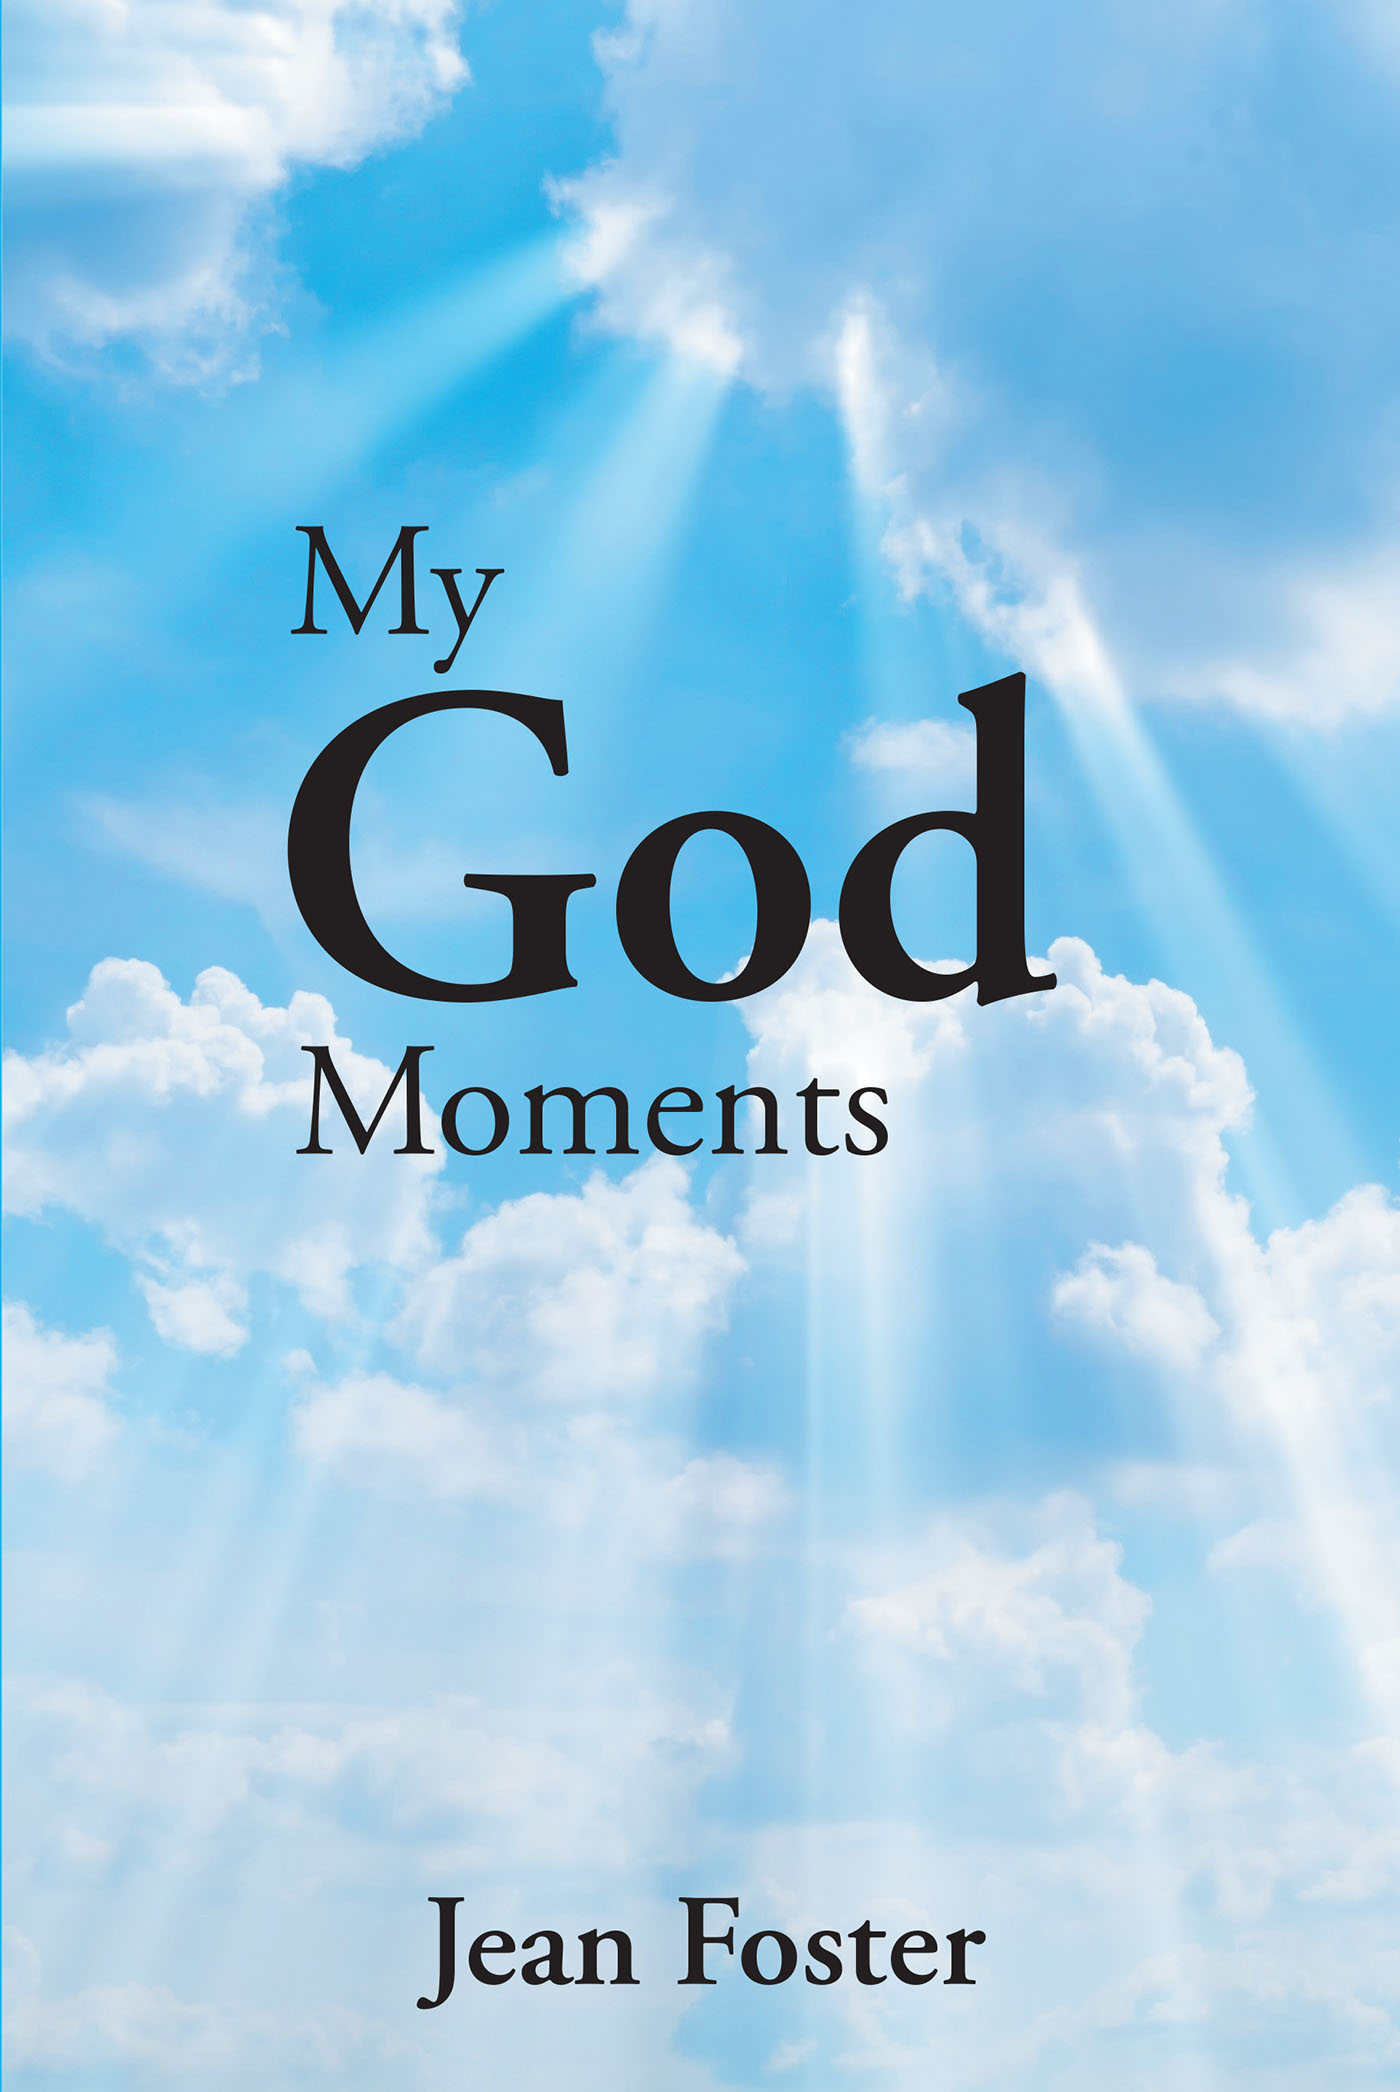 Jean Foster’s Newly Released "My God Moments" is a Poignant Reflection on Life’s Ups and Downs